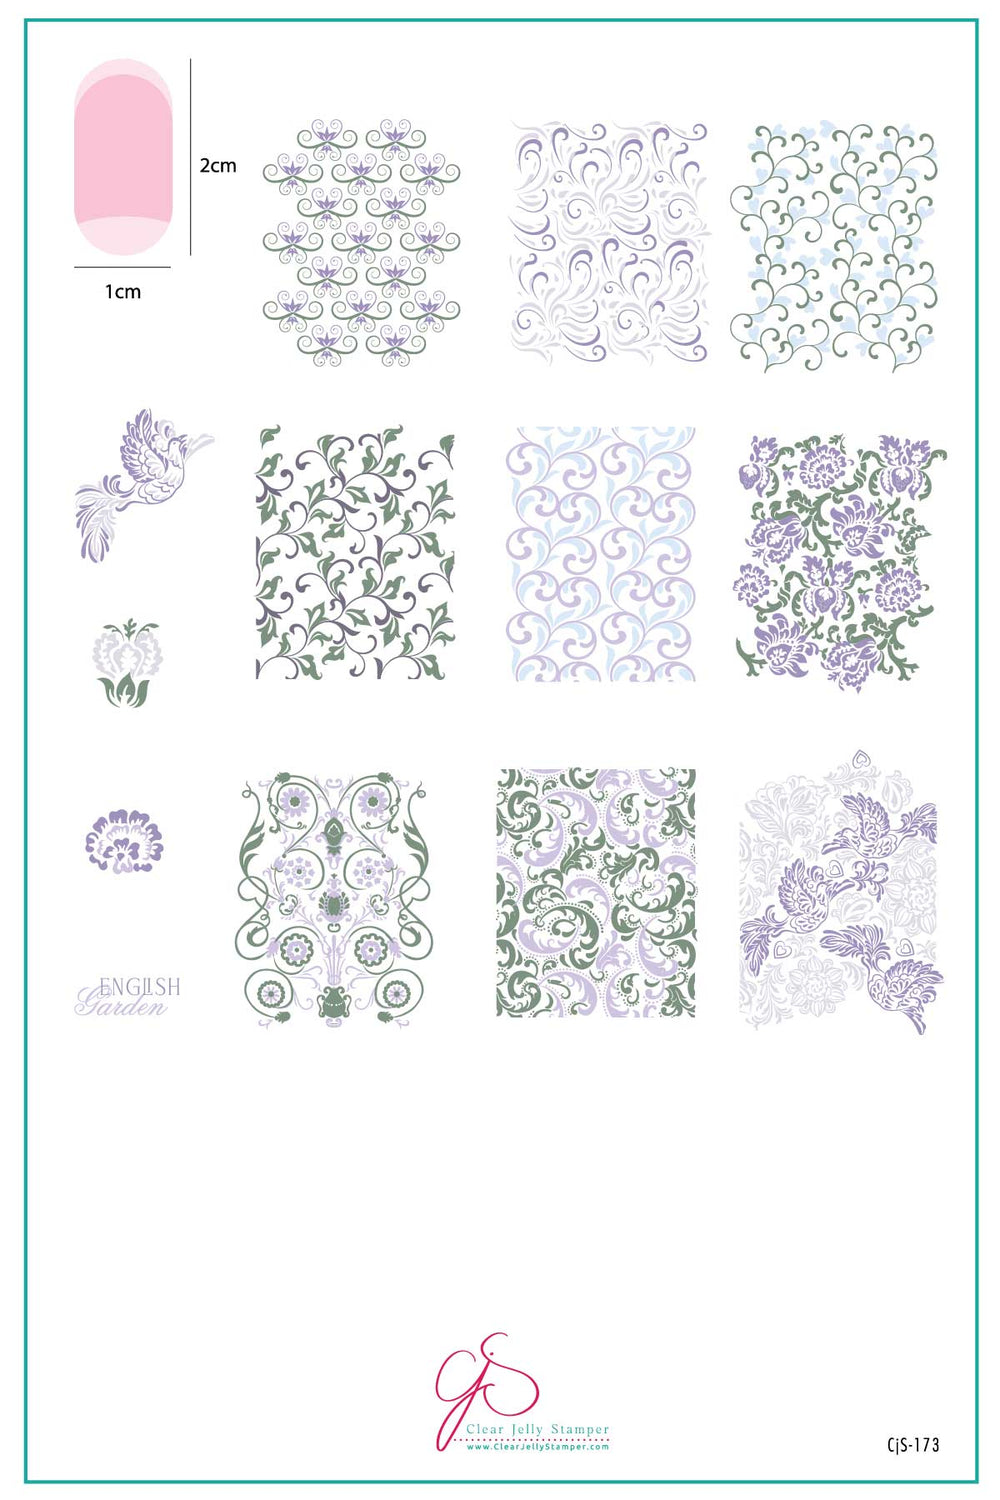 CjS-173 English Garden Swirls |  Clear Jelly Stamping Plate